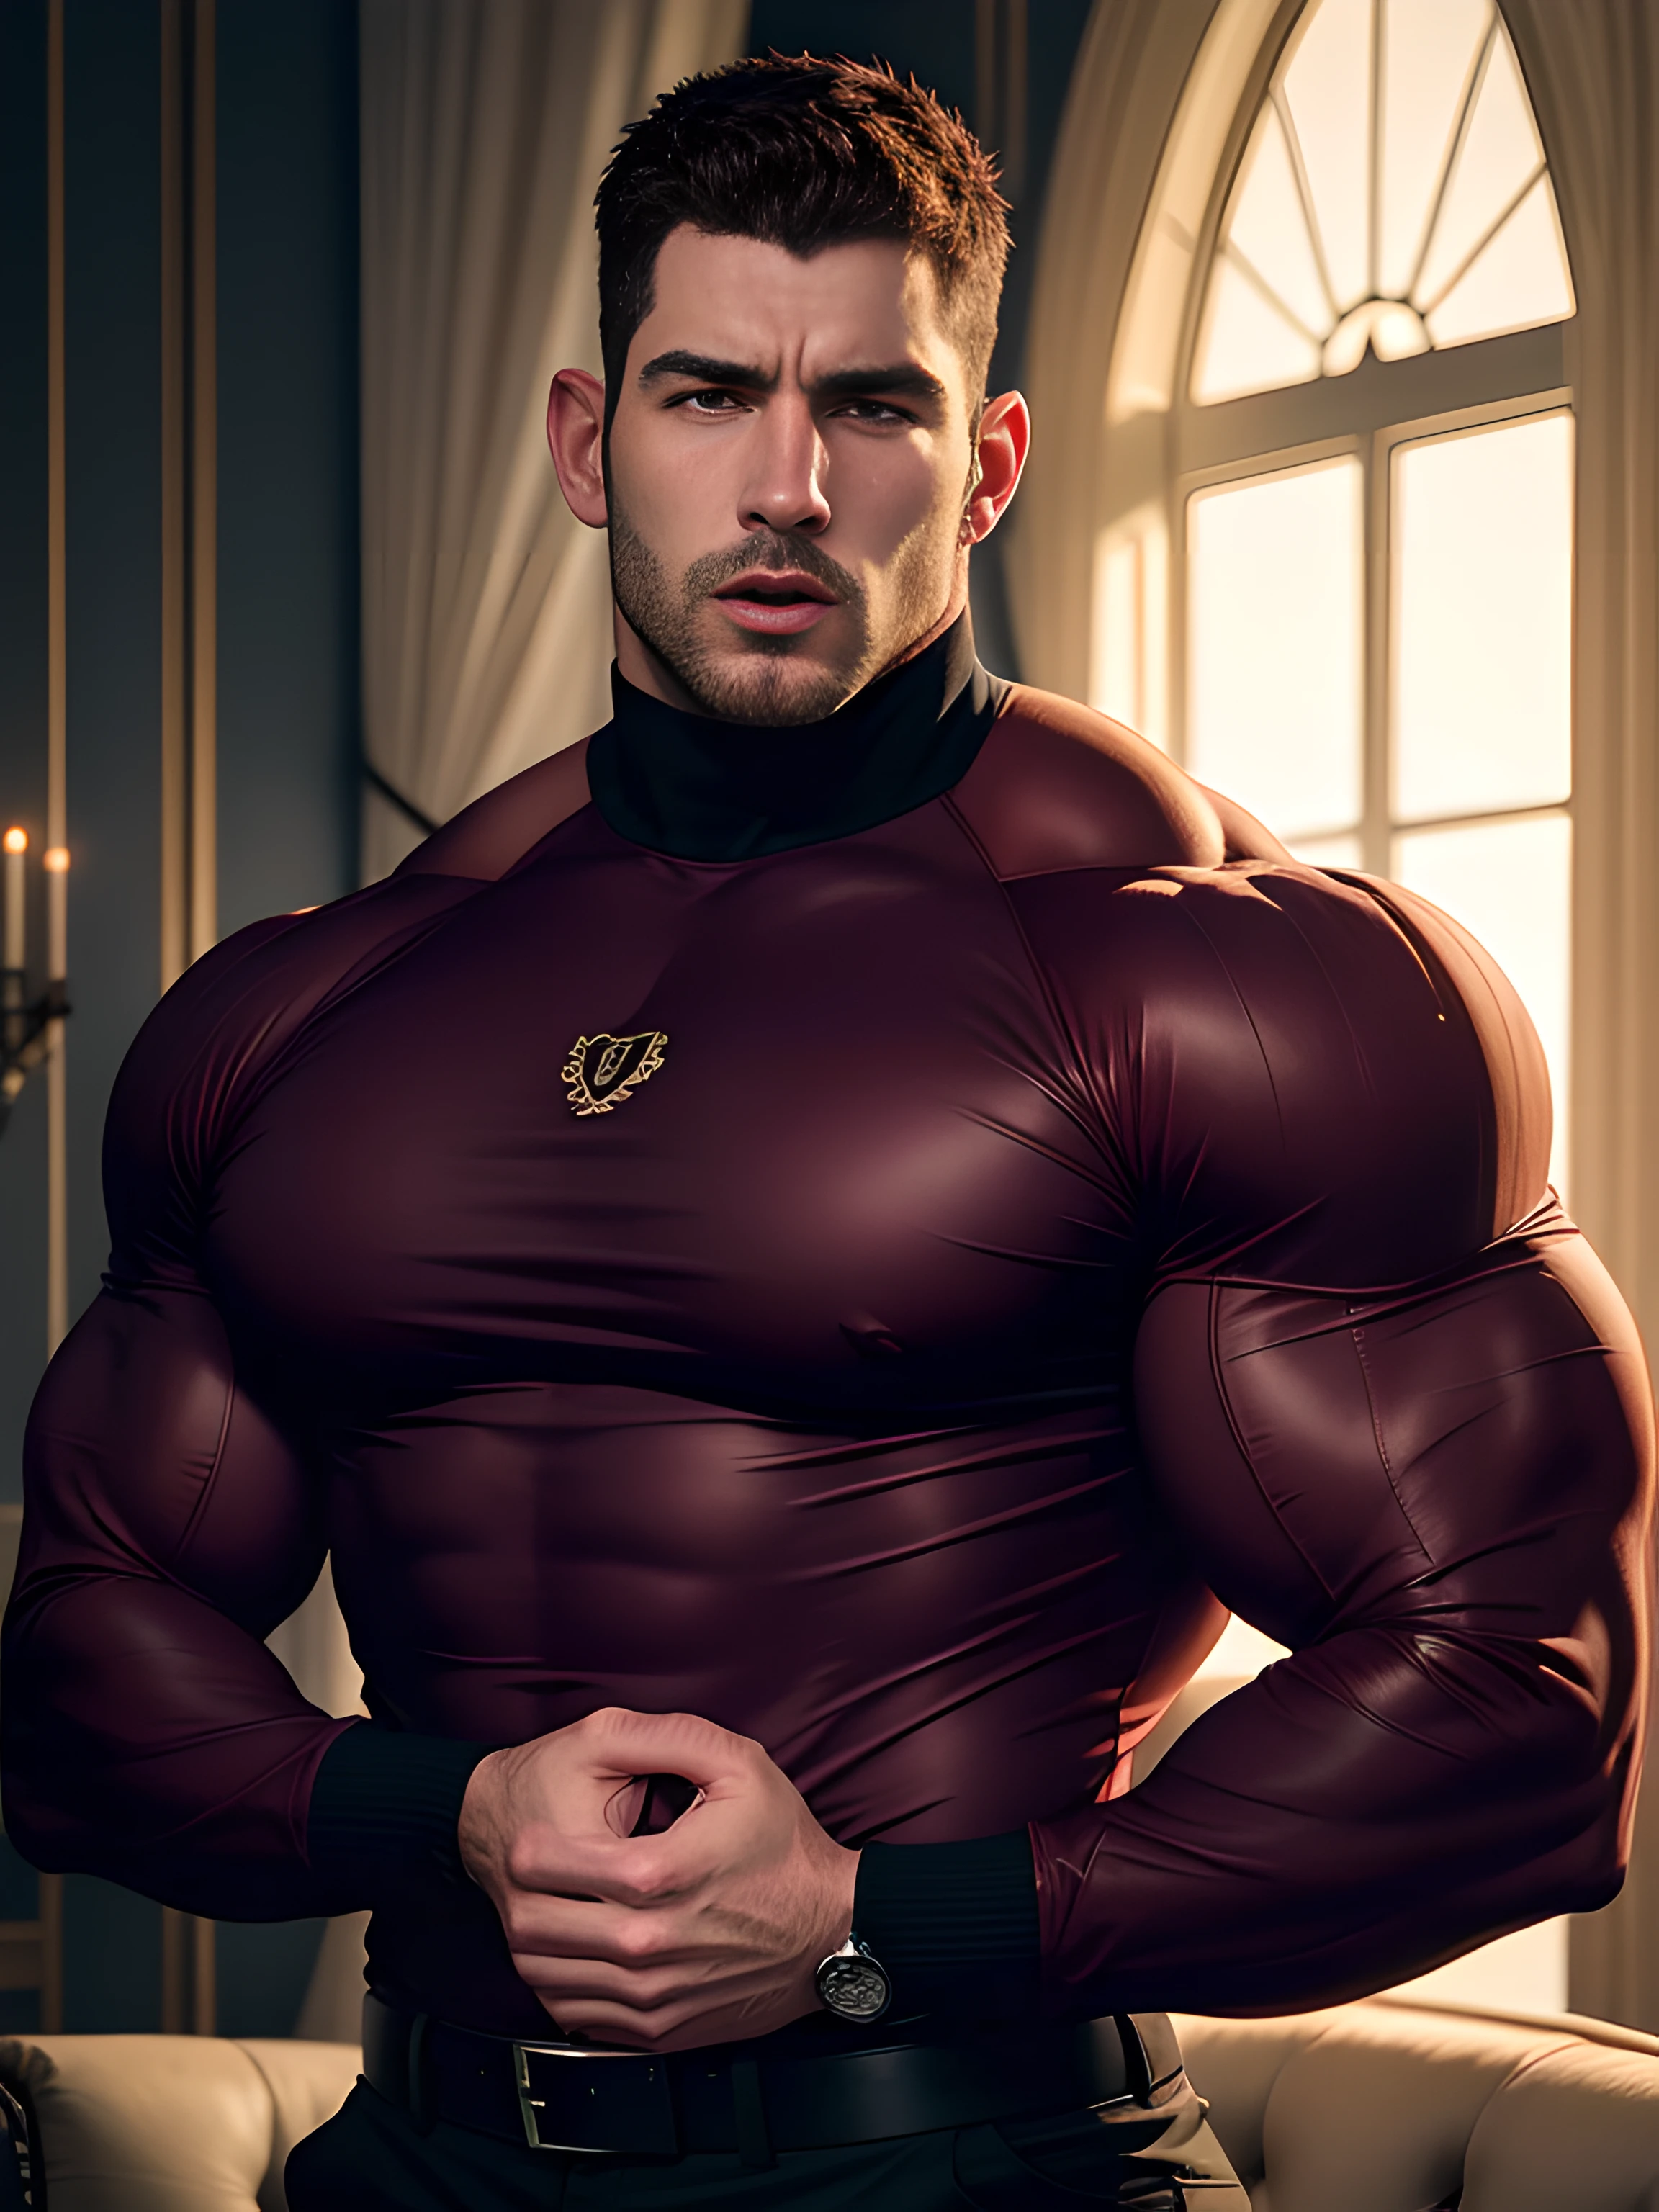 Muscular security guard with open mouth，Chris Redfield，He wears a long-sleeved turtleneck sweater，He had sad eyes in his eyes，Grievanced frown，Emerald charming eyes，Tall and burly，musculous！Tall, Burly and strong， Extremely detailed depiction of faces，Exquisite facial features，super gain and cool， commission for high resolution， Attractive strong men，Luxurious warmth in burgundy tones，He was in the luxurious living room